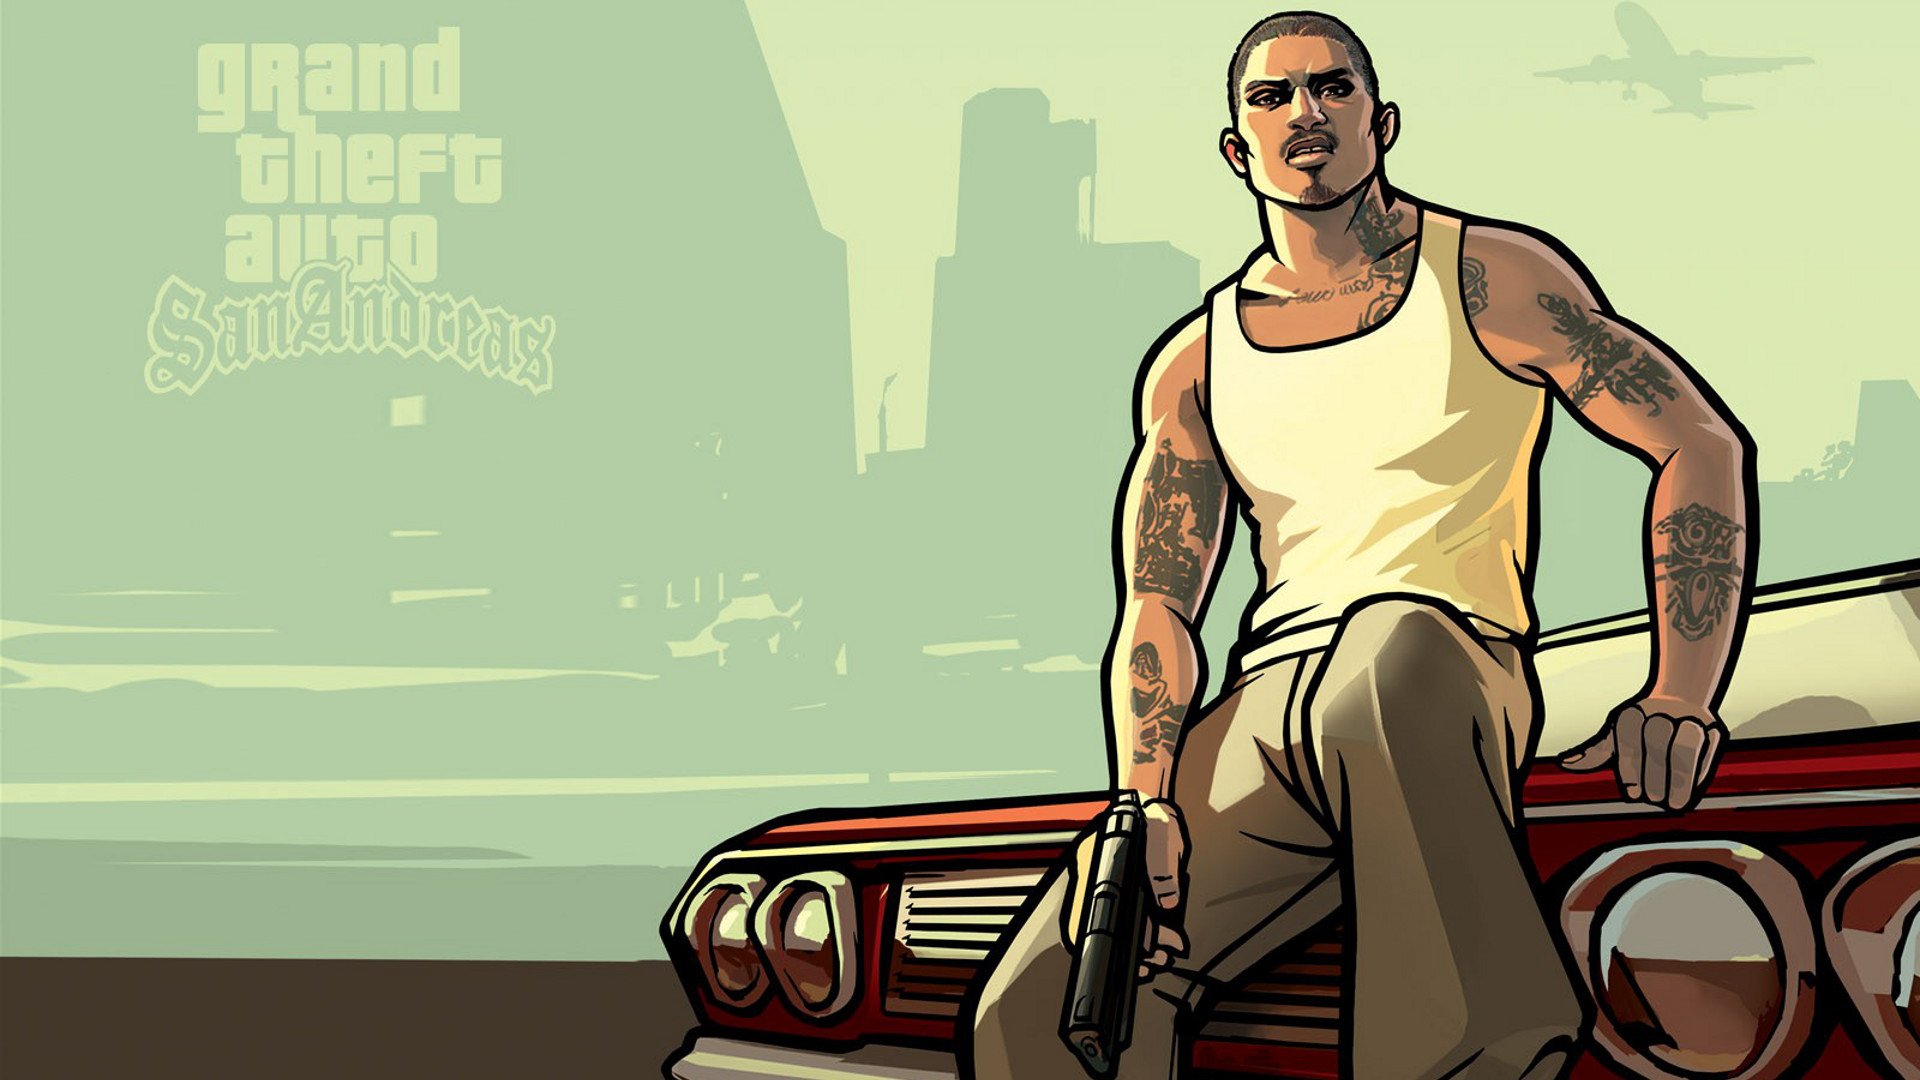 Grand Theft Auto San Andreas Full HD Wallpaper and